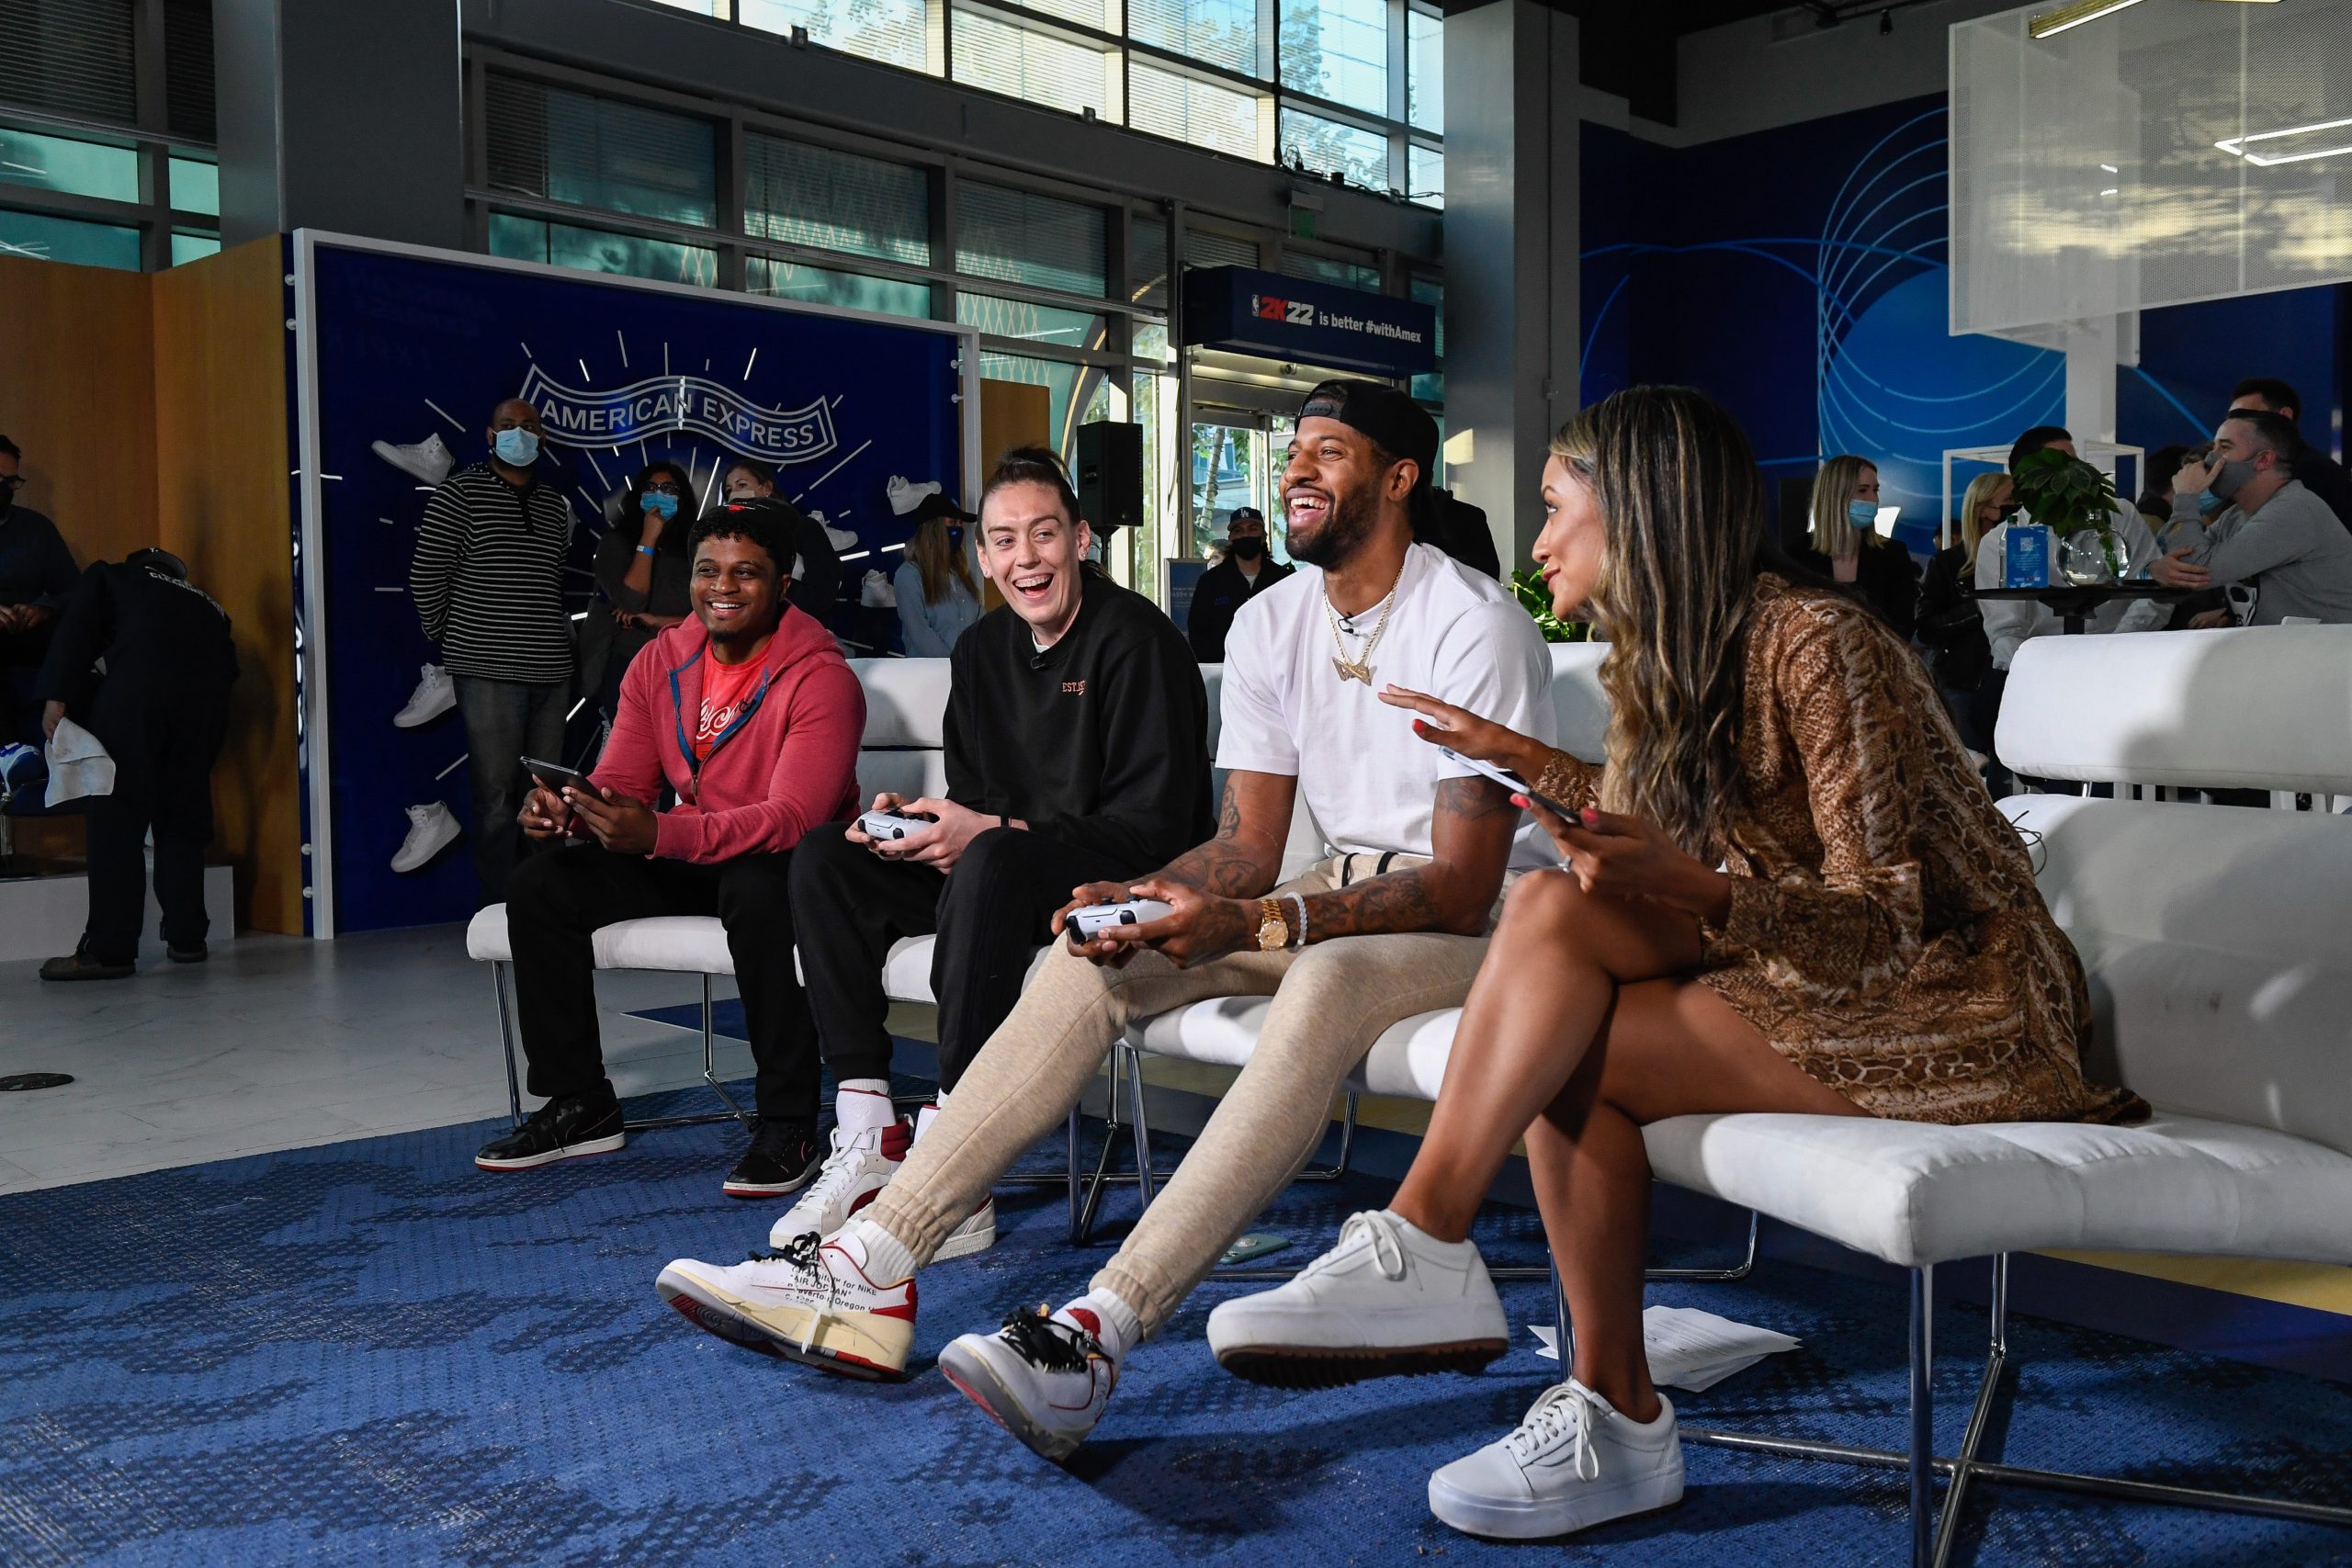 NBA star Paul George, second form right, and WNBA star Breanna Stewart, second from left, face-off in a live NBA 2K22 game at the American Express x NBA 2K22 experience on Friday, Dec. 10, 2021, in Los Angeles. (Kyusung Gong/American Express via AP Images)